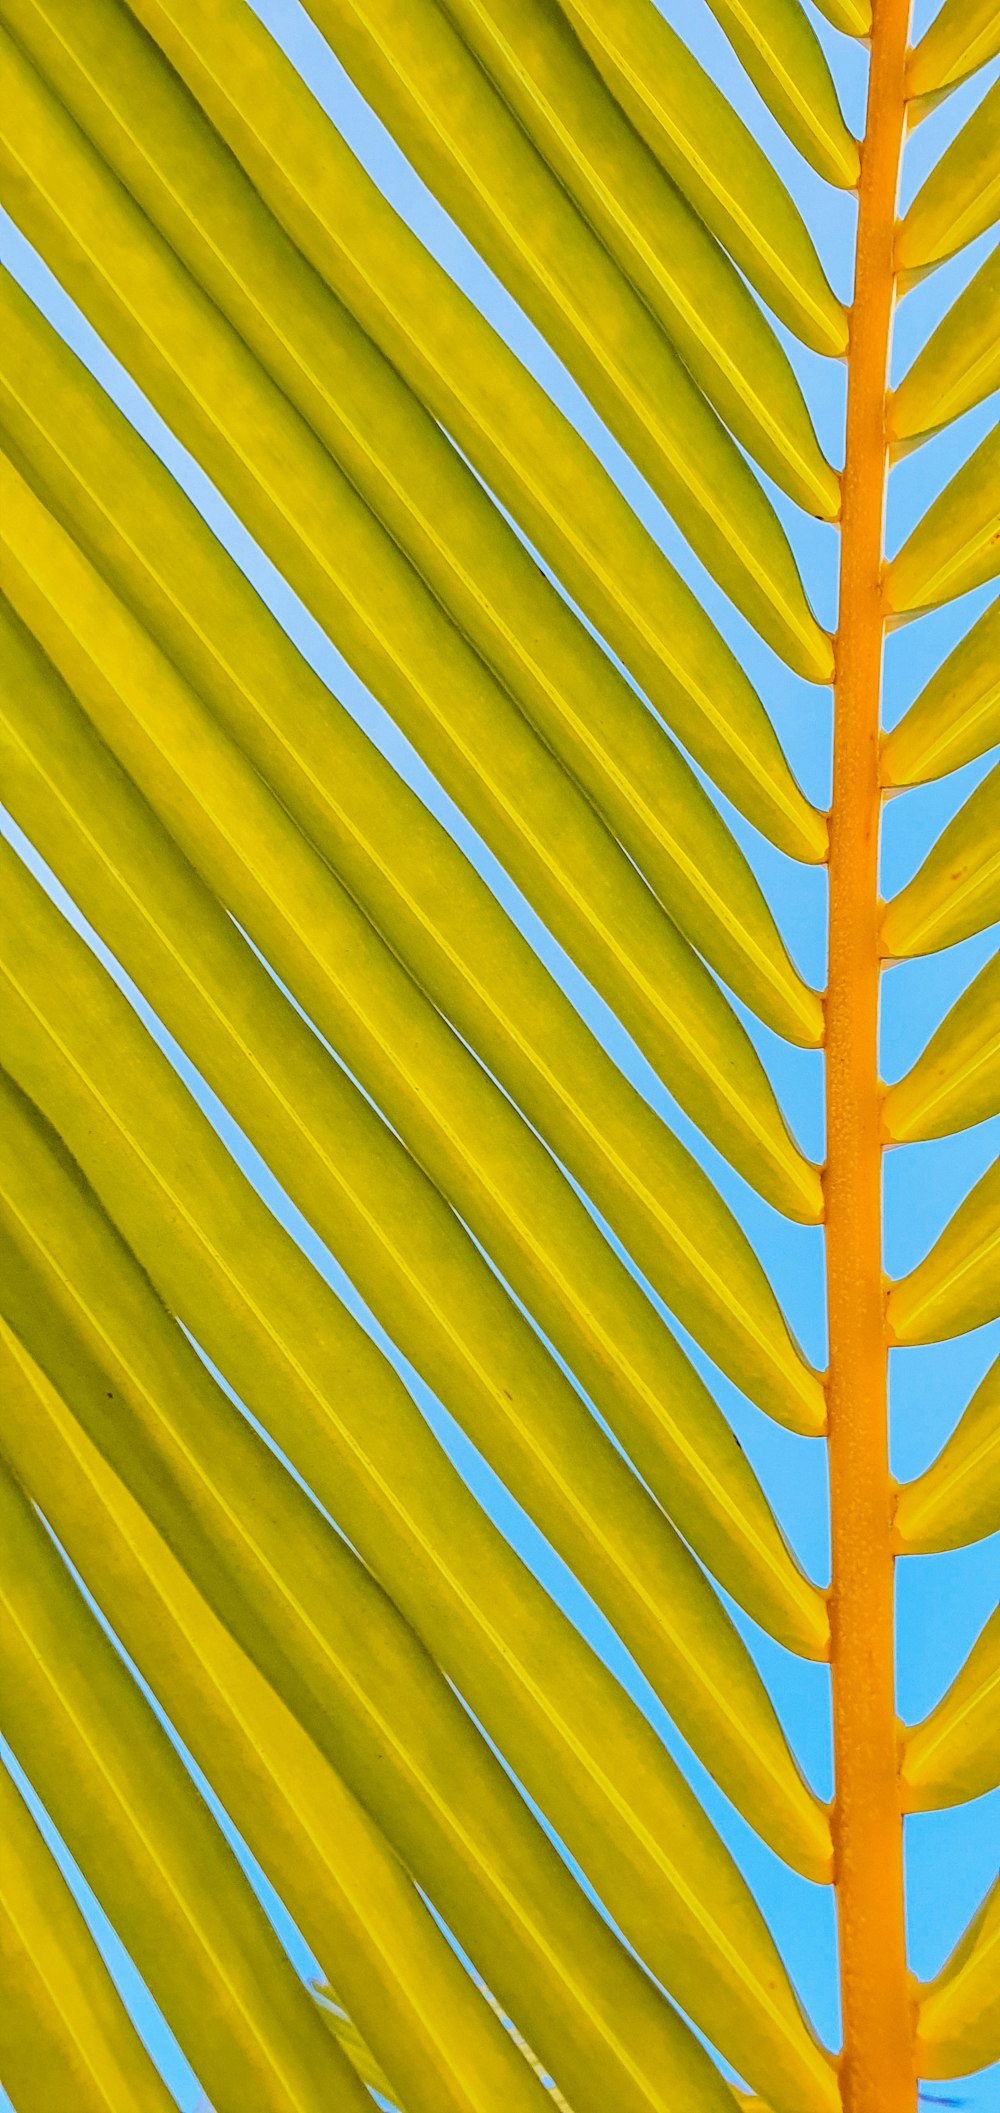 yellow banana leaf in close up photography